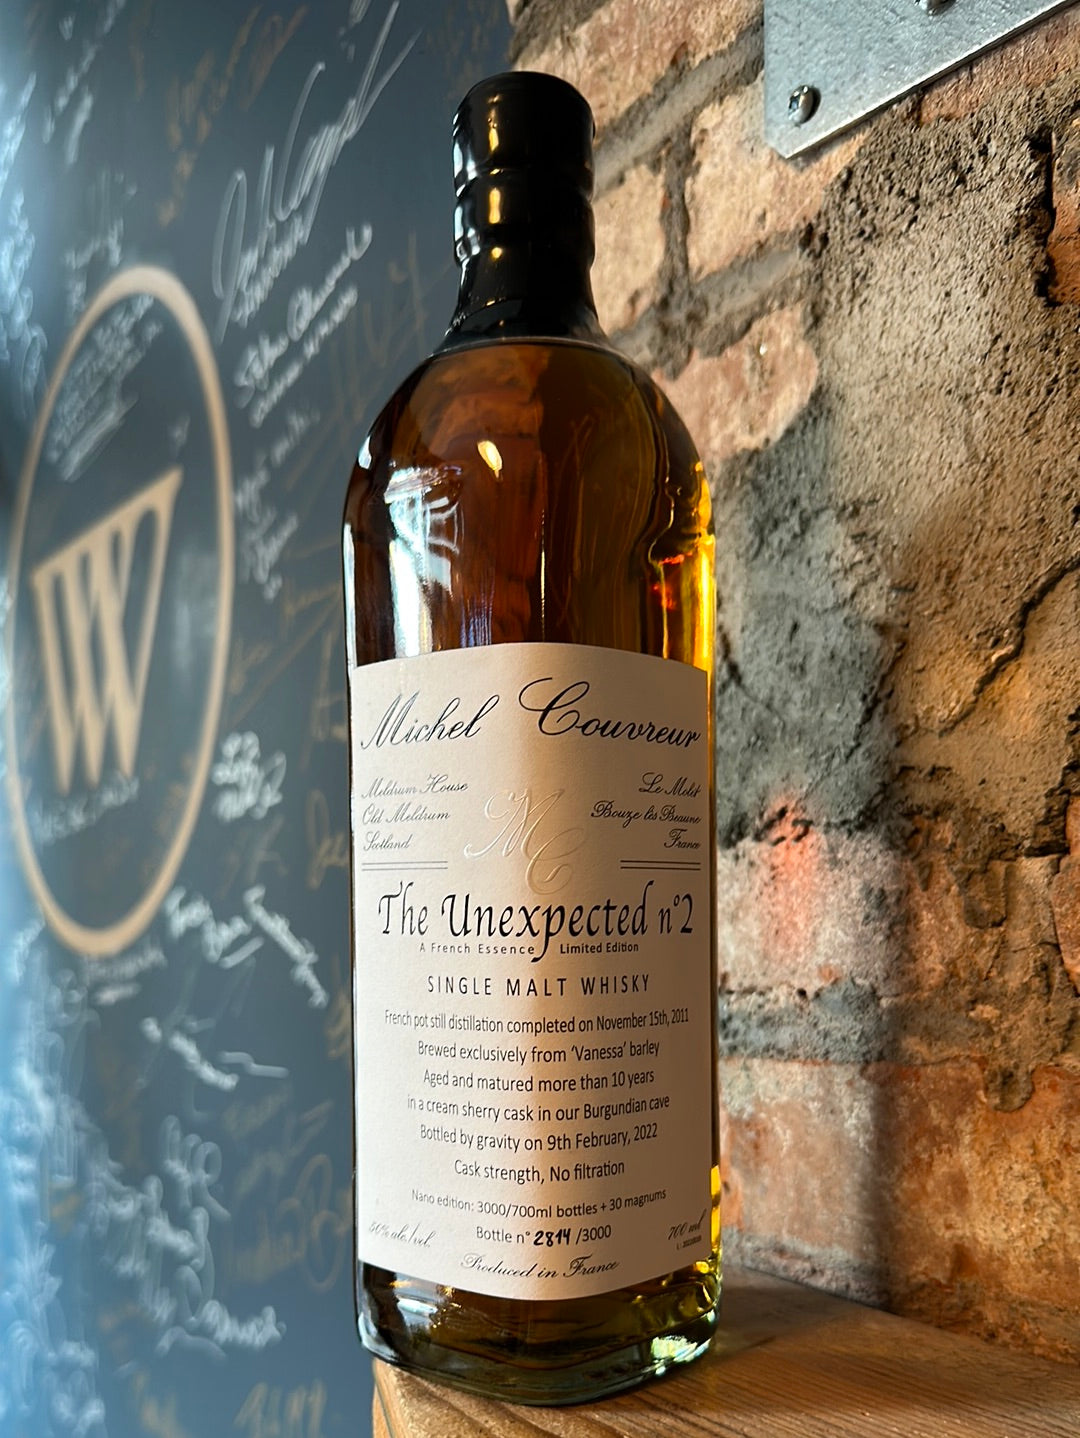 Michel Couvreur 'The Unexpected' No. 2 Single Malt Whisky [NY STATE ONLY]